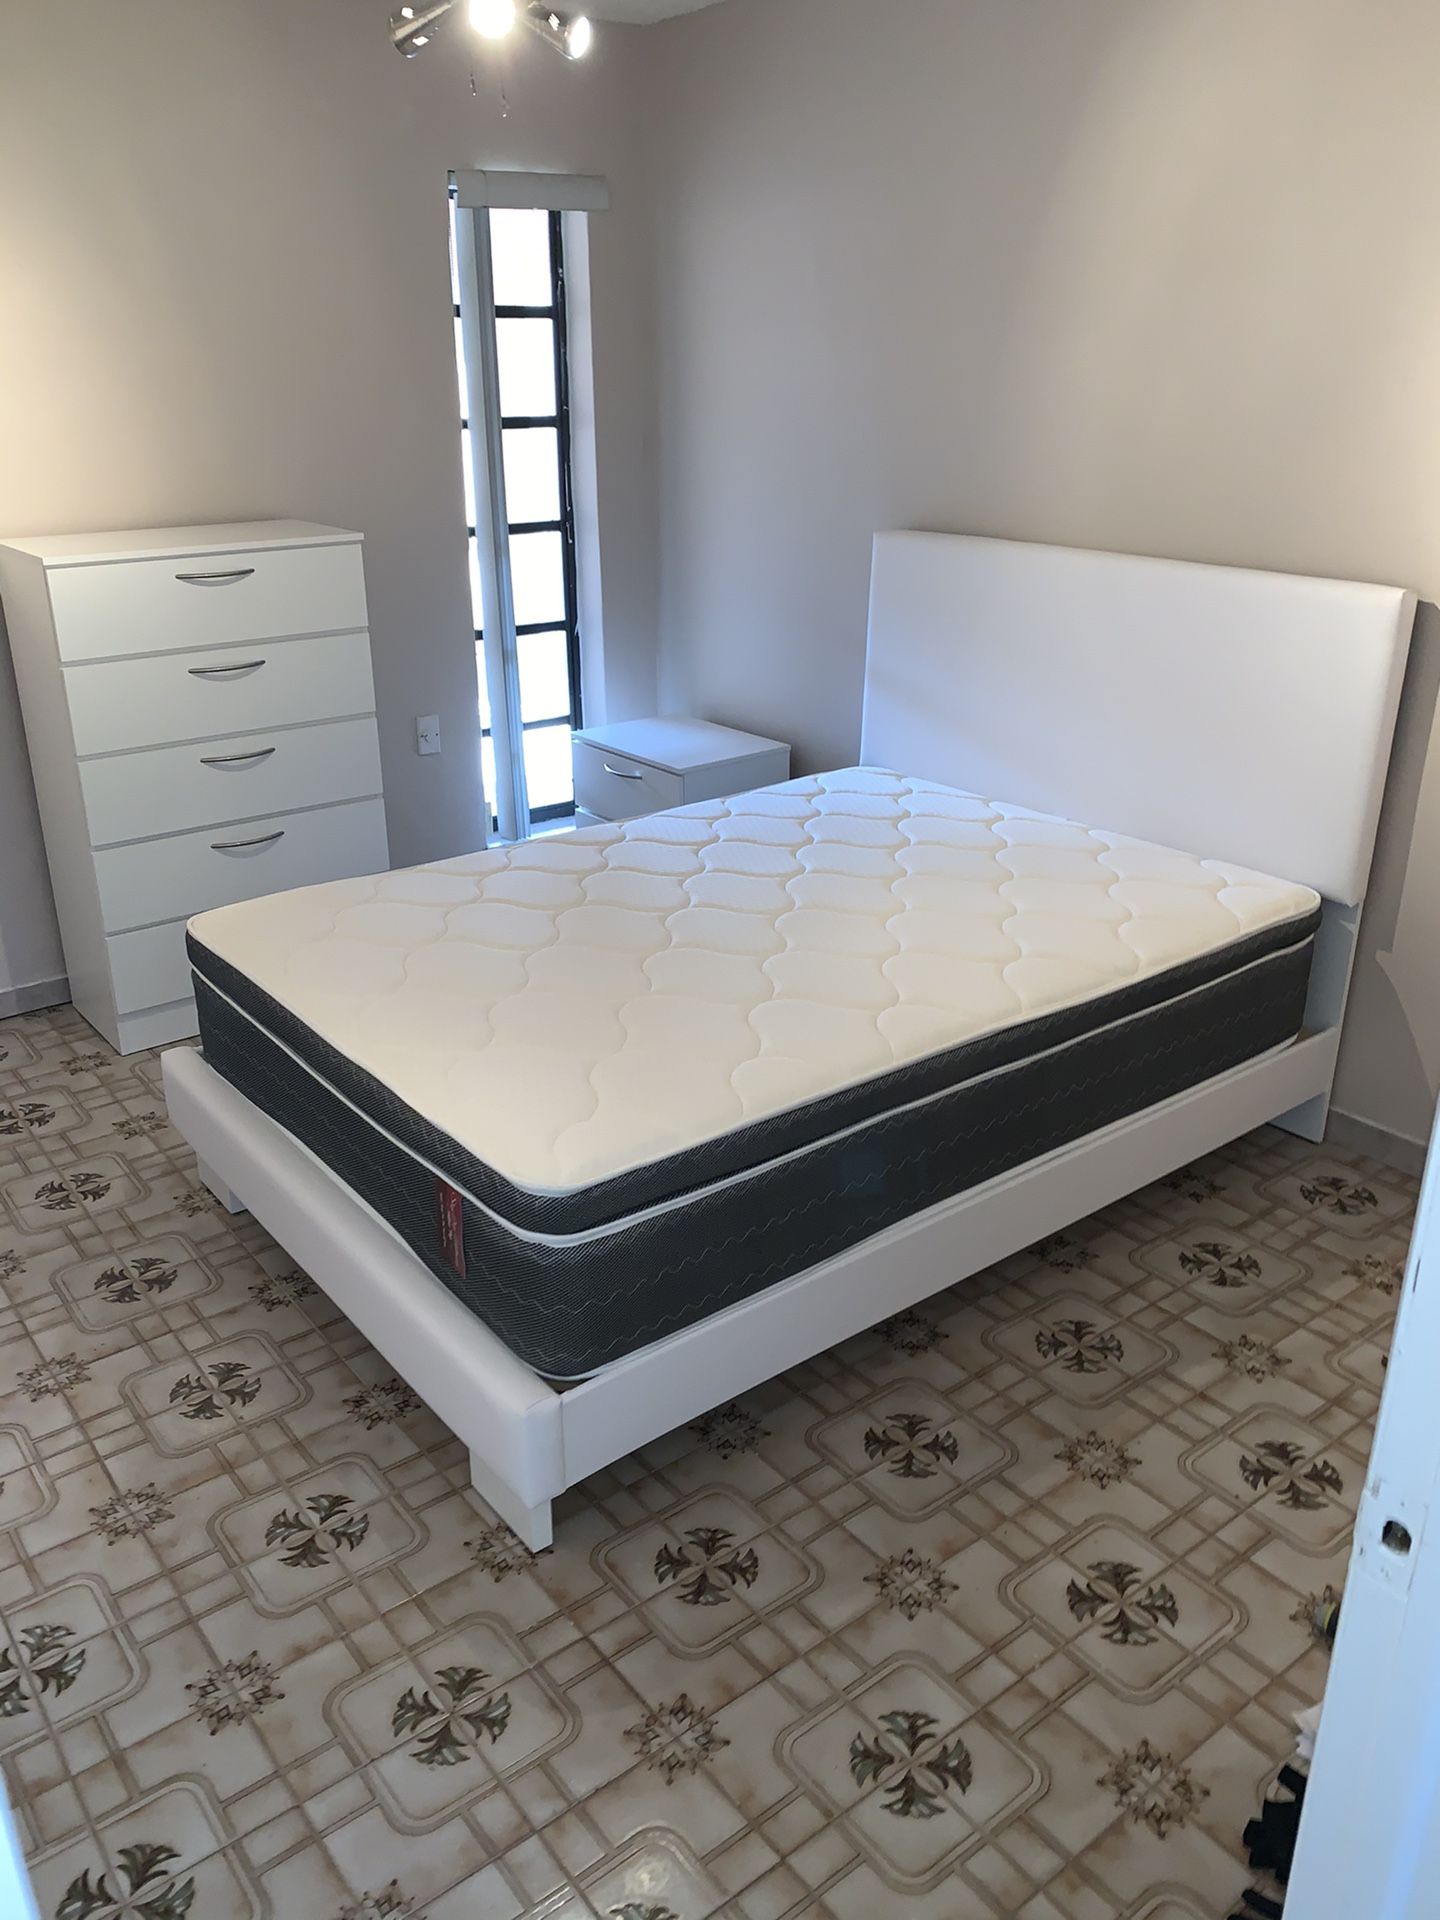 New queen white bedroom set 4 pieces. Mattress bed frame chest and night stand FREE DELIVERY. Also available in full size and twin size black and br